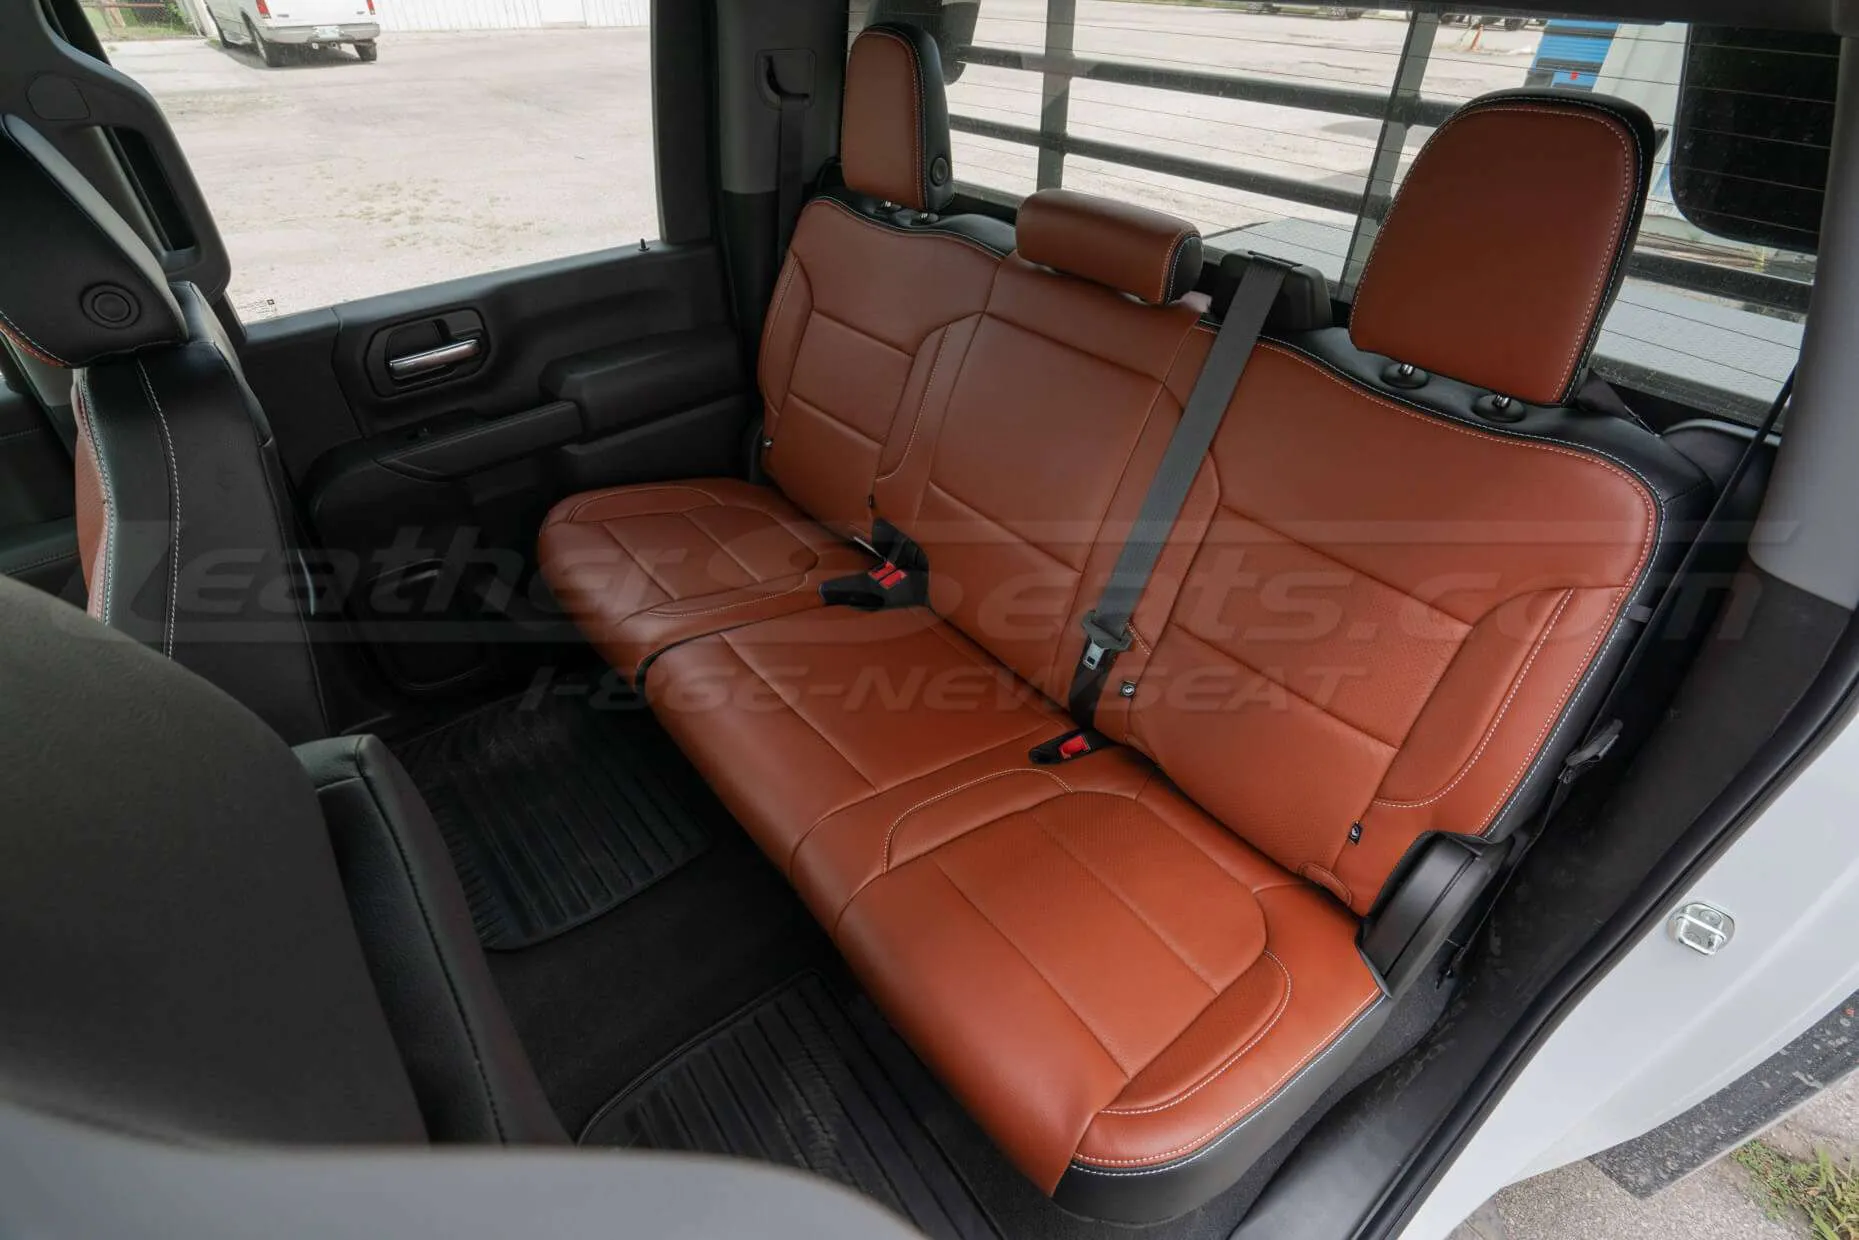 Chevrolet Silverado Leather Seats - Black & Mitt Brown - Rear seats from drivers side